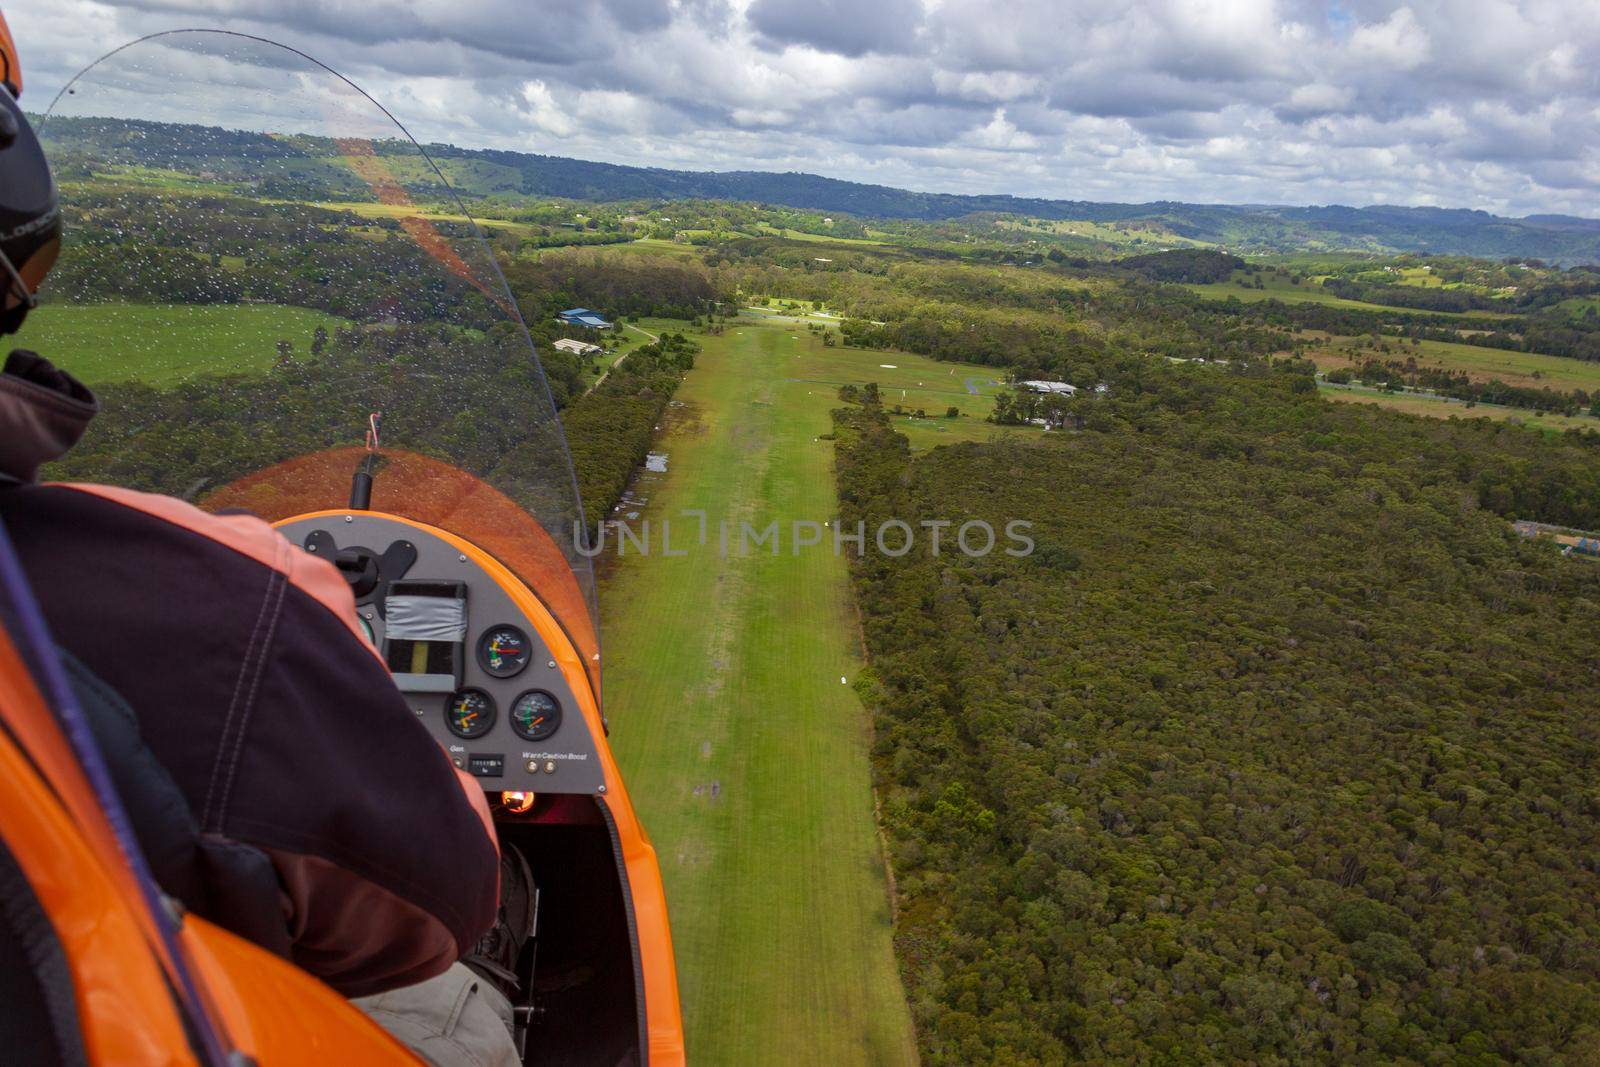 Gyrocopter is landing on an airfield out of gras, Byron Bay, Queensland, Australia by bettercallcurry